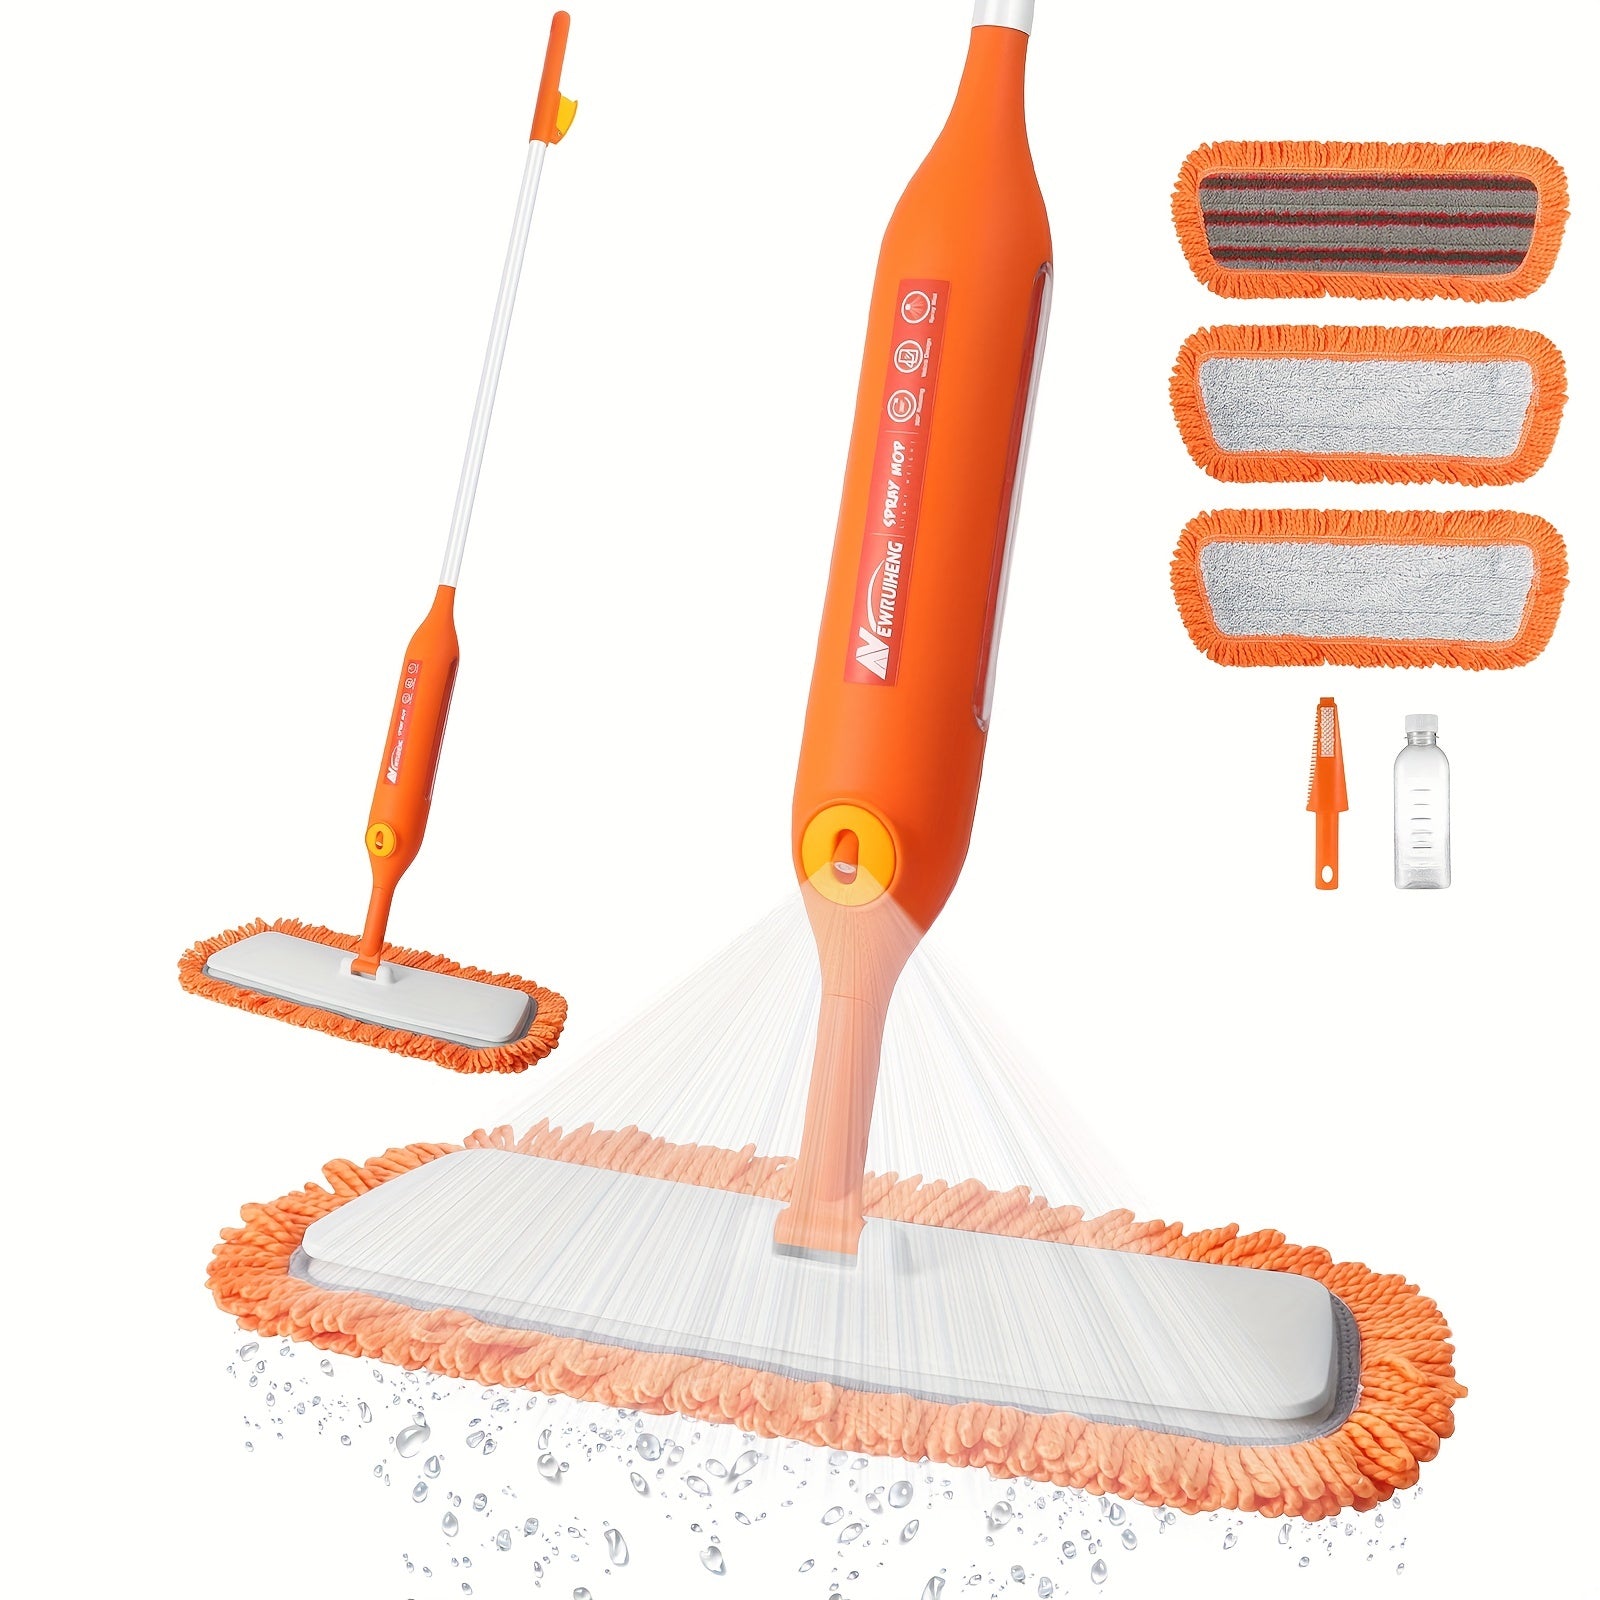 VENETIO 1set, 360° Spin Dry Microfiber Spray Mop with Reusable Washable Mop Pads for Cleaning Kitchen, Wood, Tile, Vinyl, and Ceramic Floors ➡ CS-00010